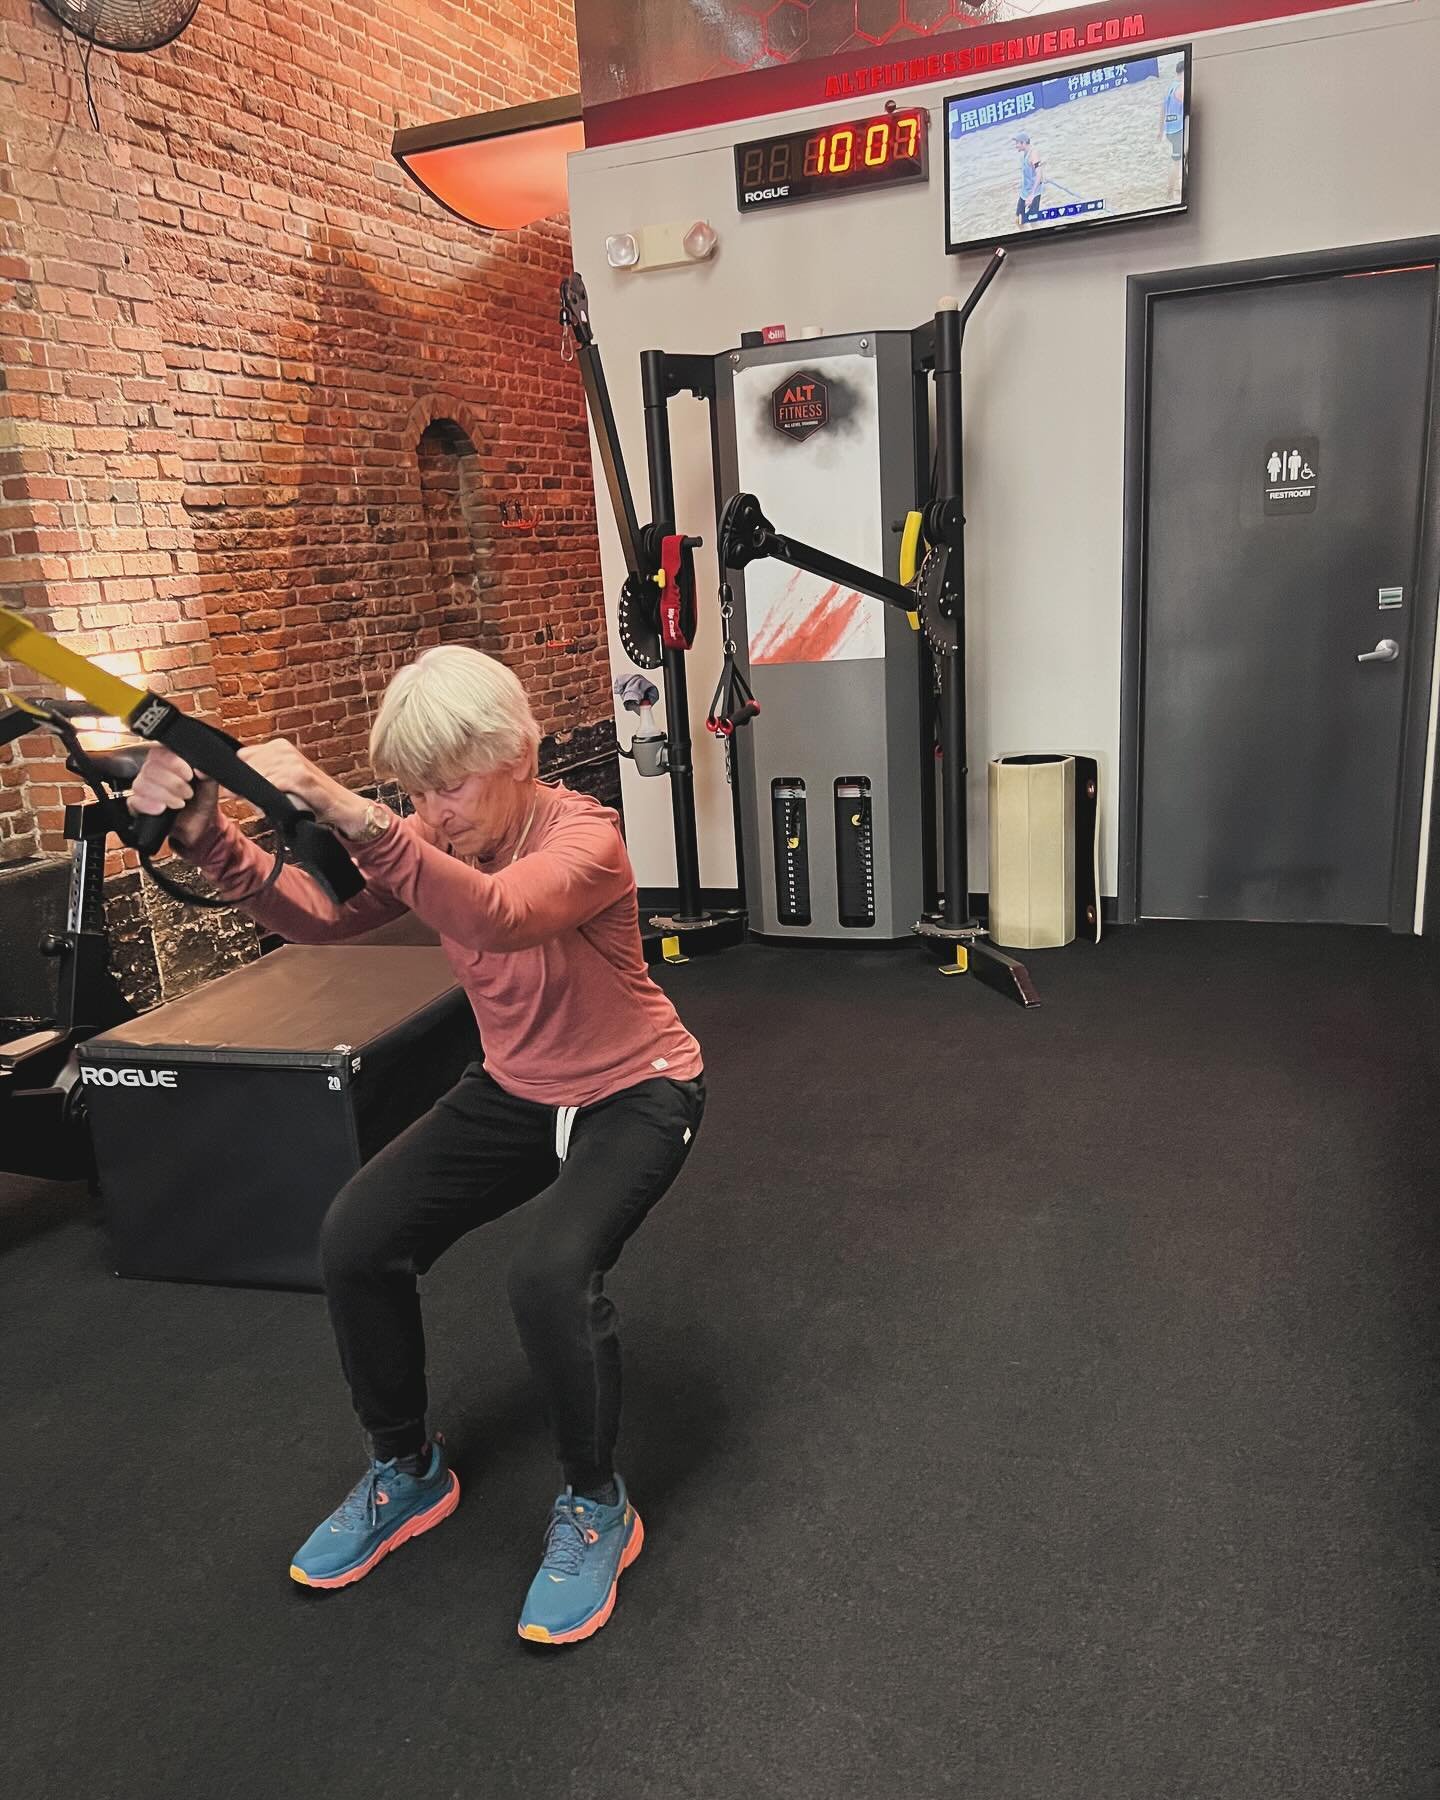 Marilyn is 76 years old and has been training with us at ALT for 10 plus years. She rides her bike to the gym always seems to have a smile on her face! &ldquo;We don&rsquo;t stop playing because we get old, we get old because we stop playing.&rdquo;